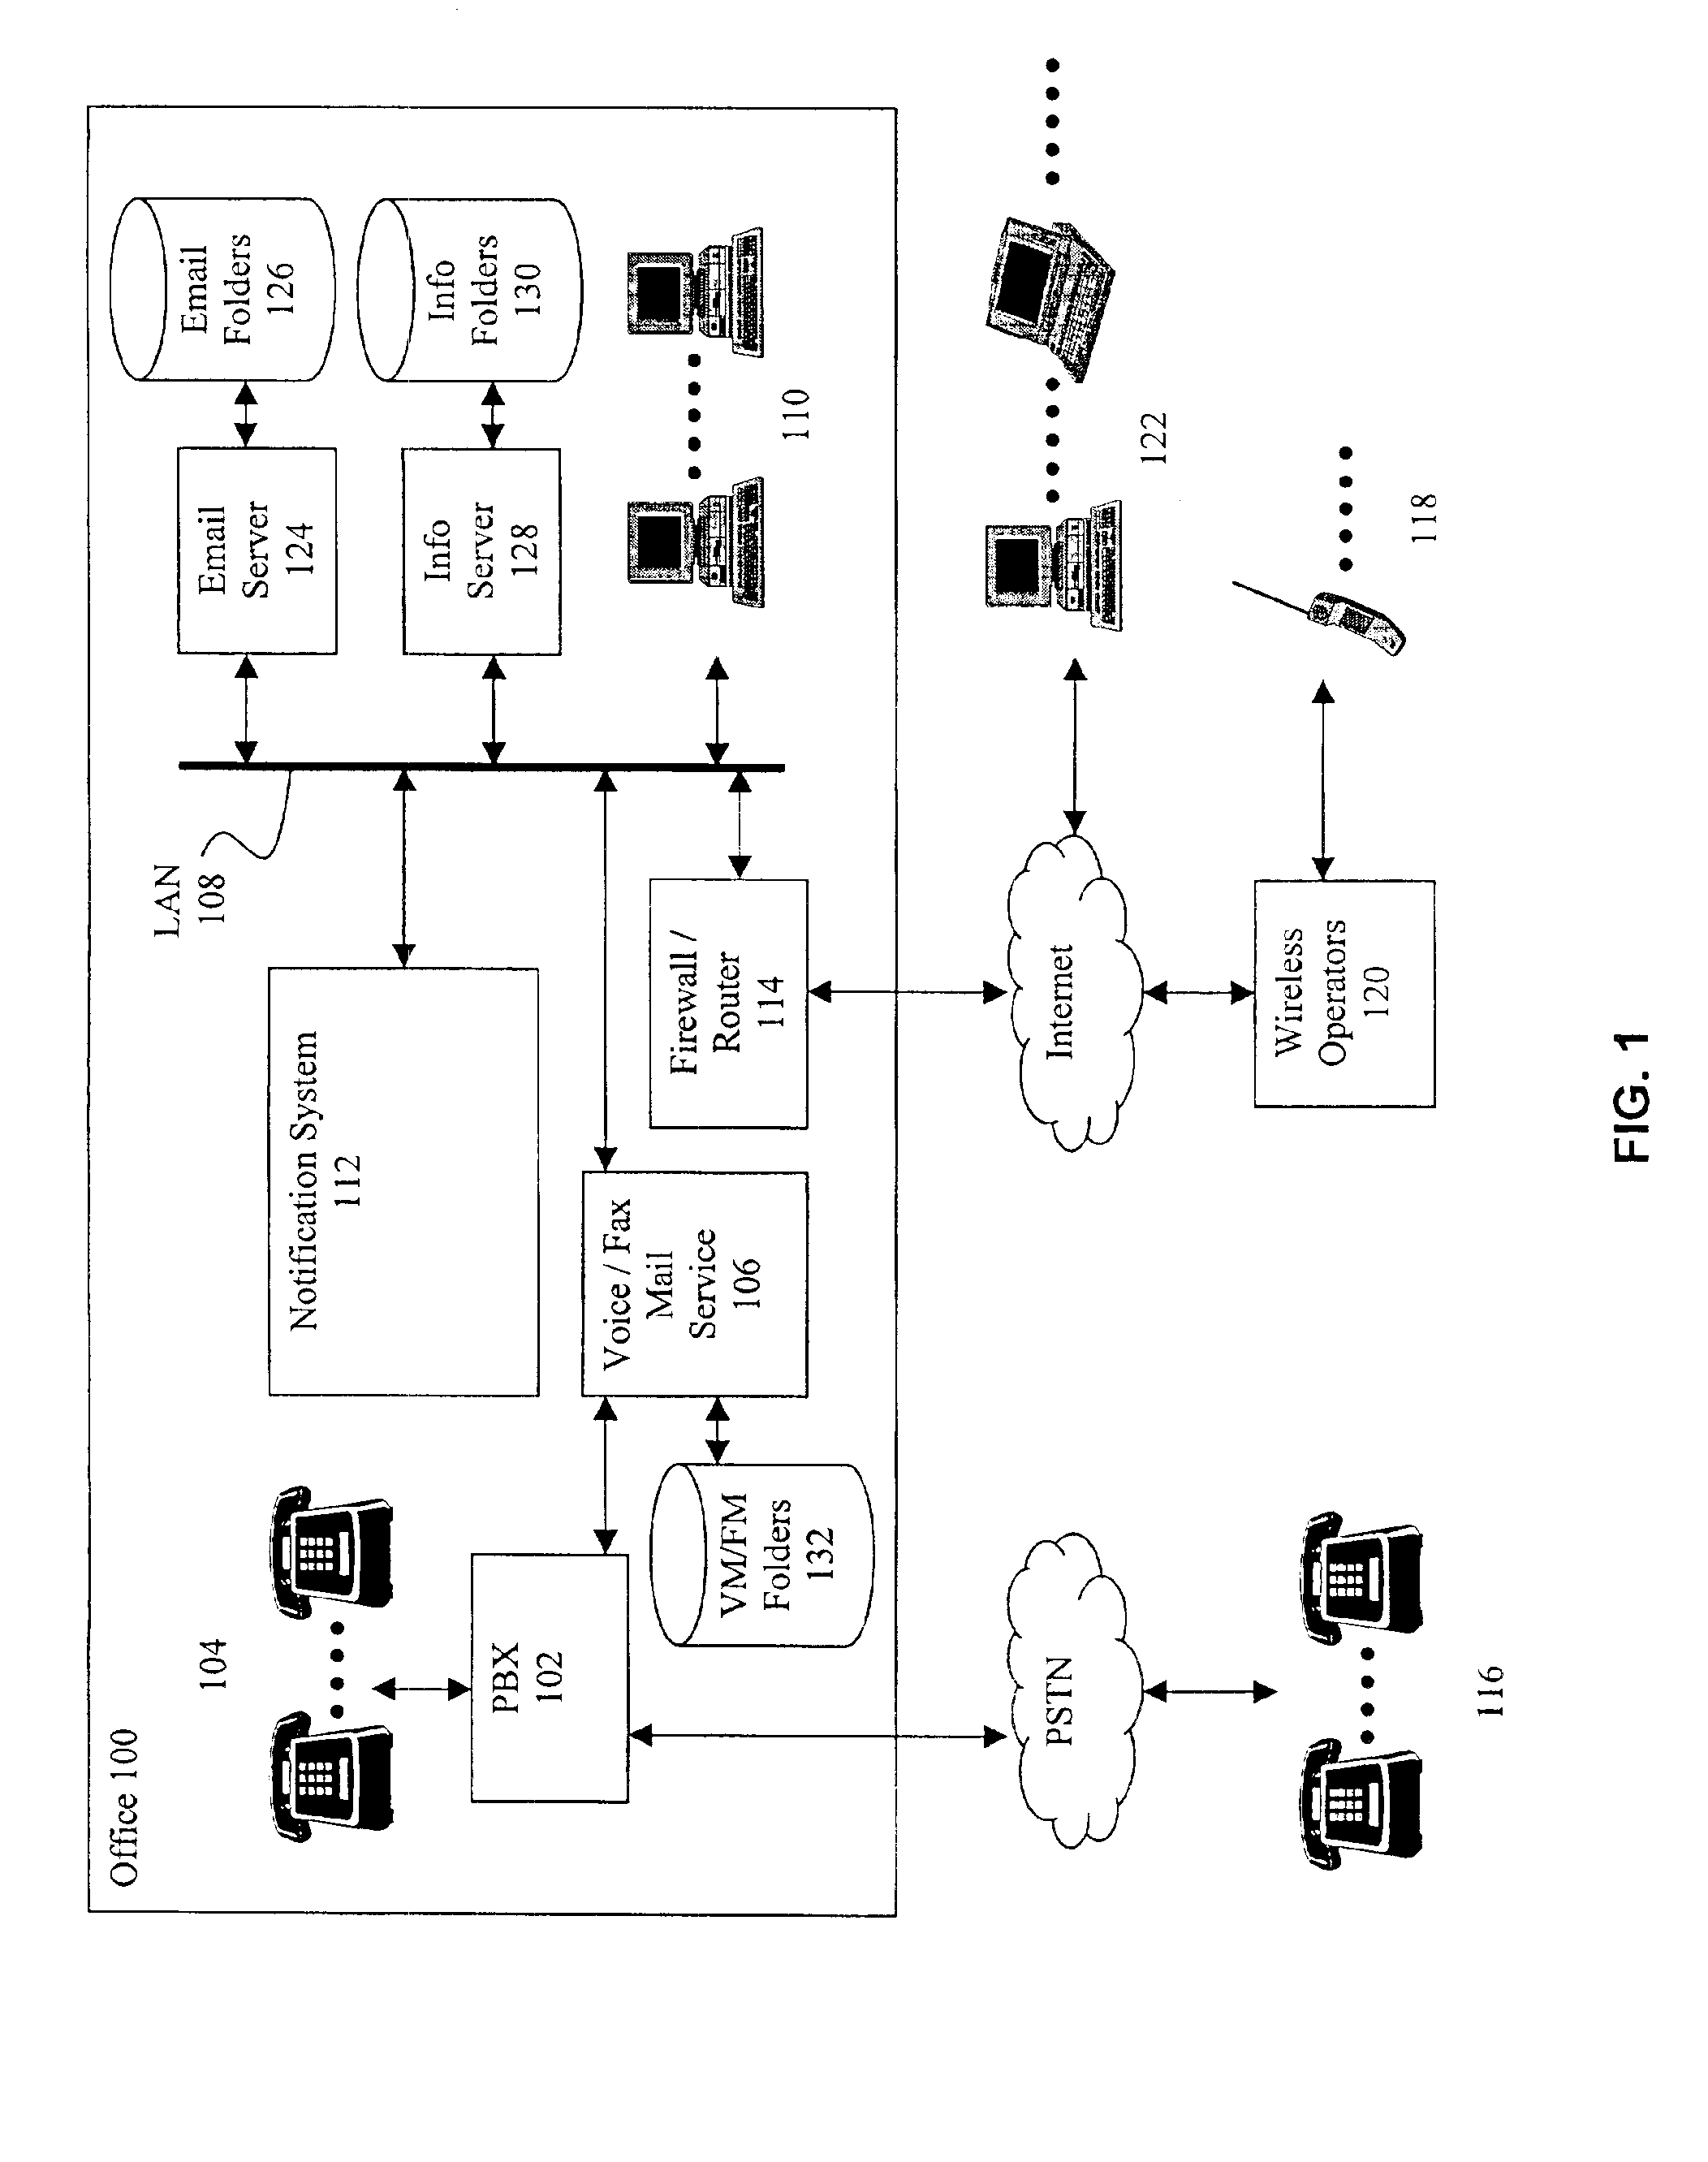 Generating and providing alert messages in a communications network